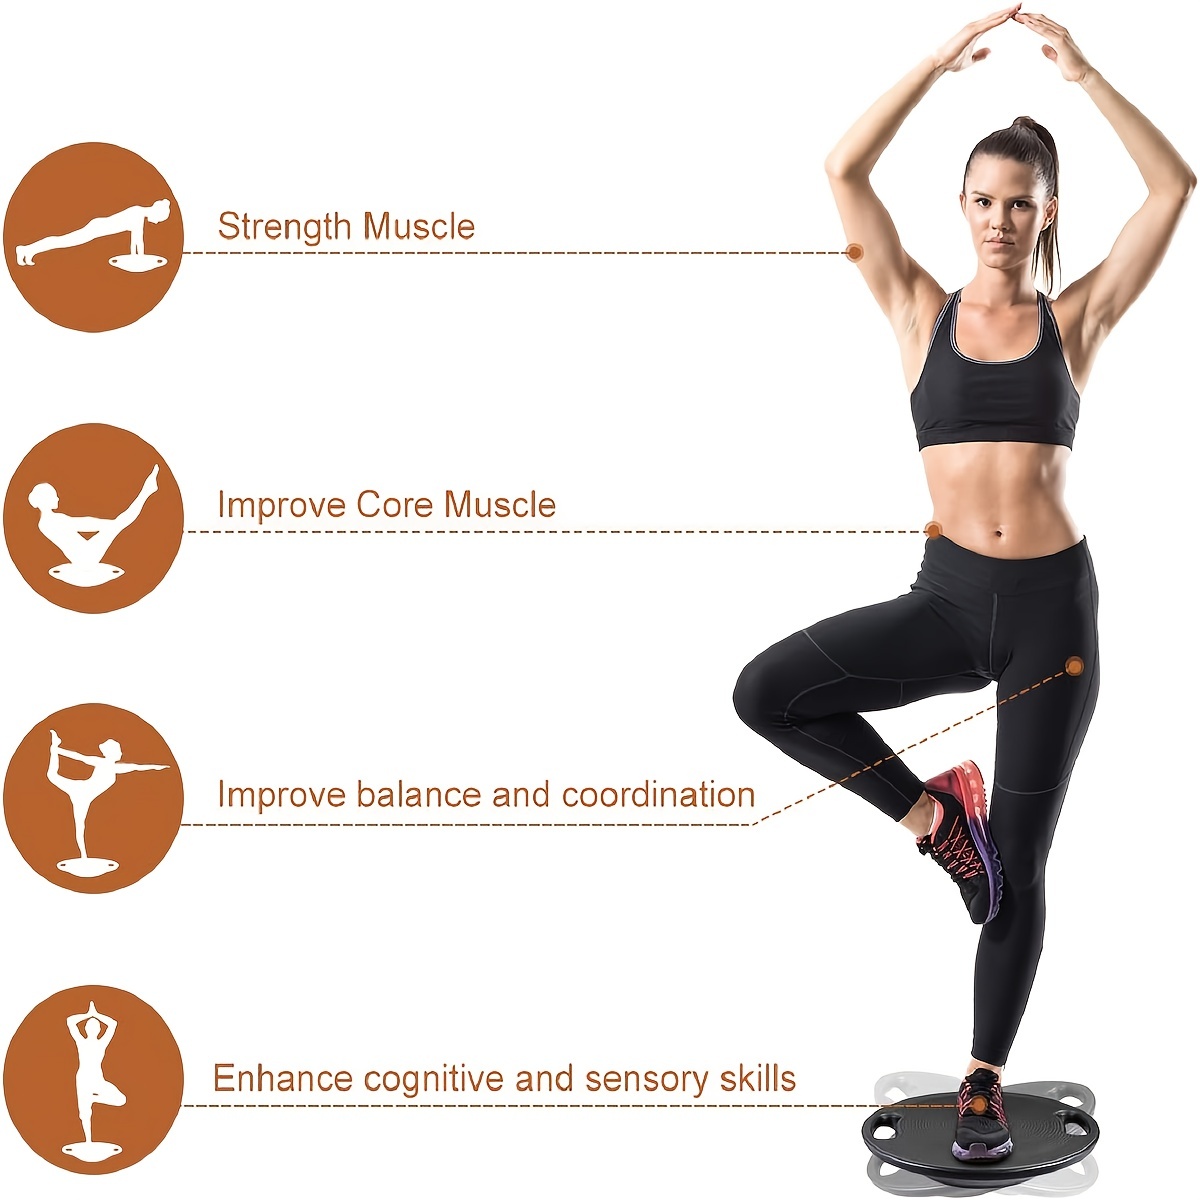 10 Best Balance Boards for Strengthening Your Core